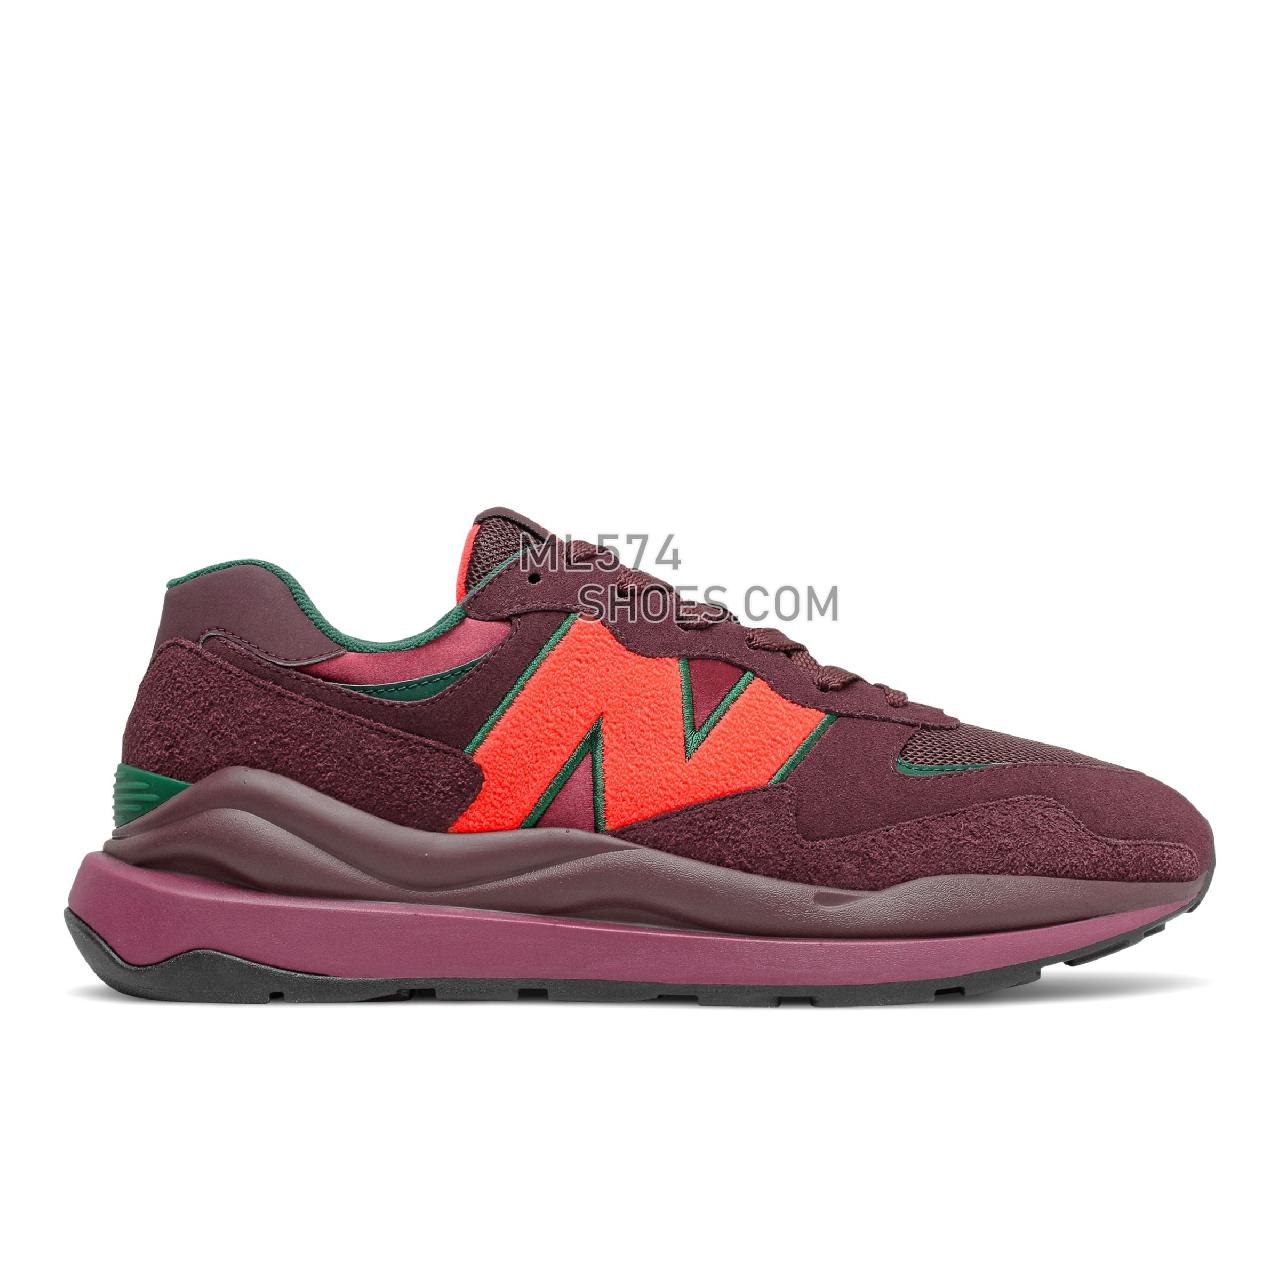 New Balance 57/40 - Men's Sport Style Sneakers - Henna with Neo Flame - M5740WA1